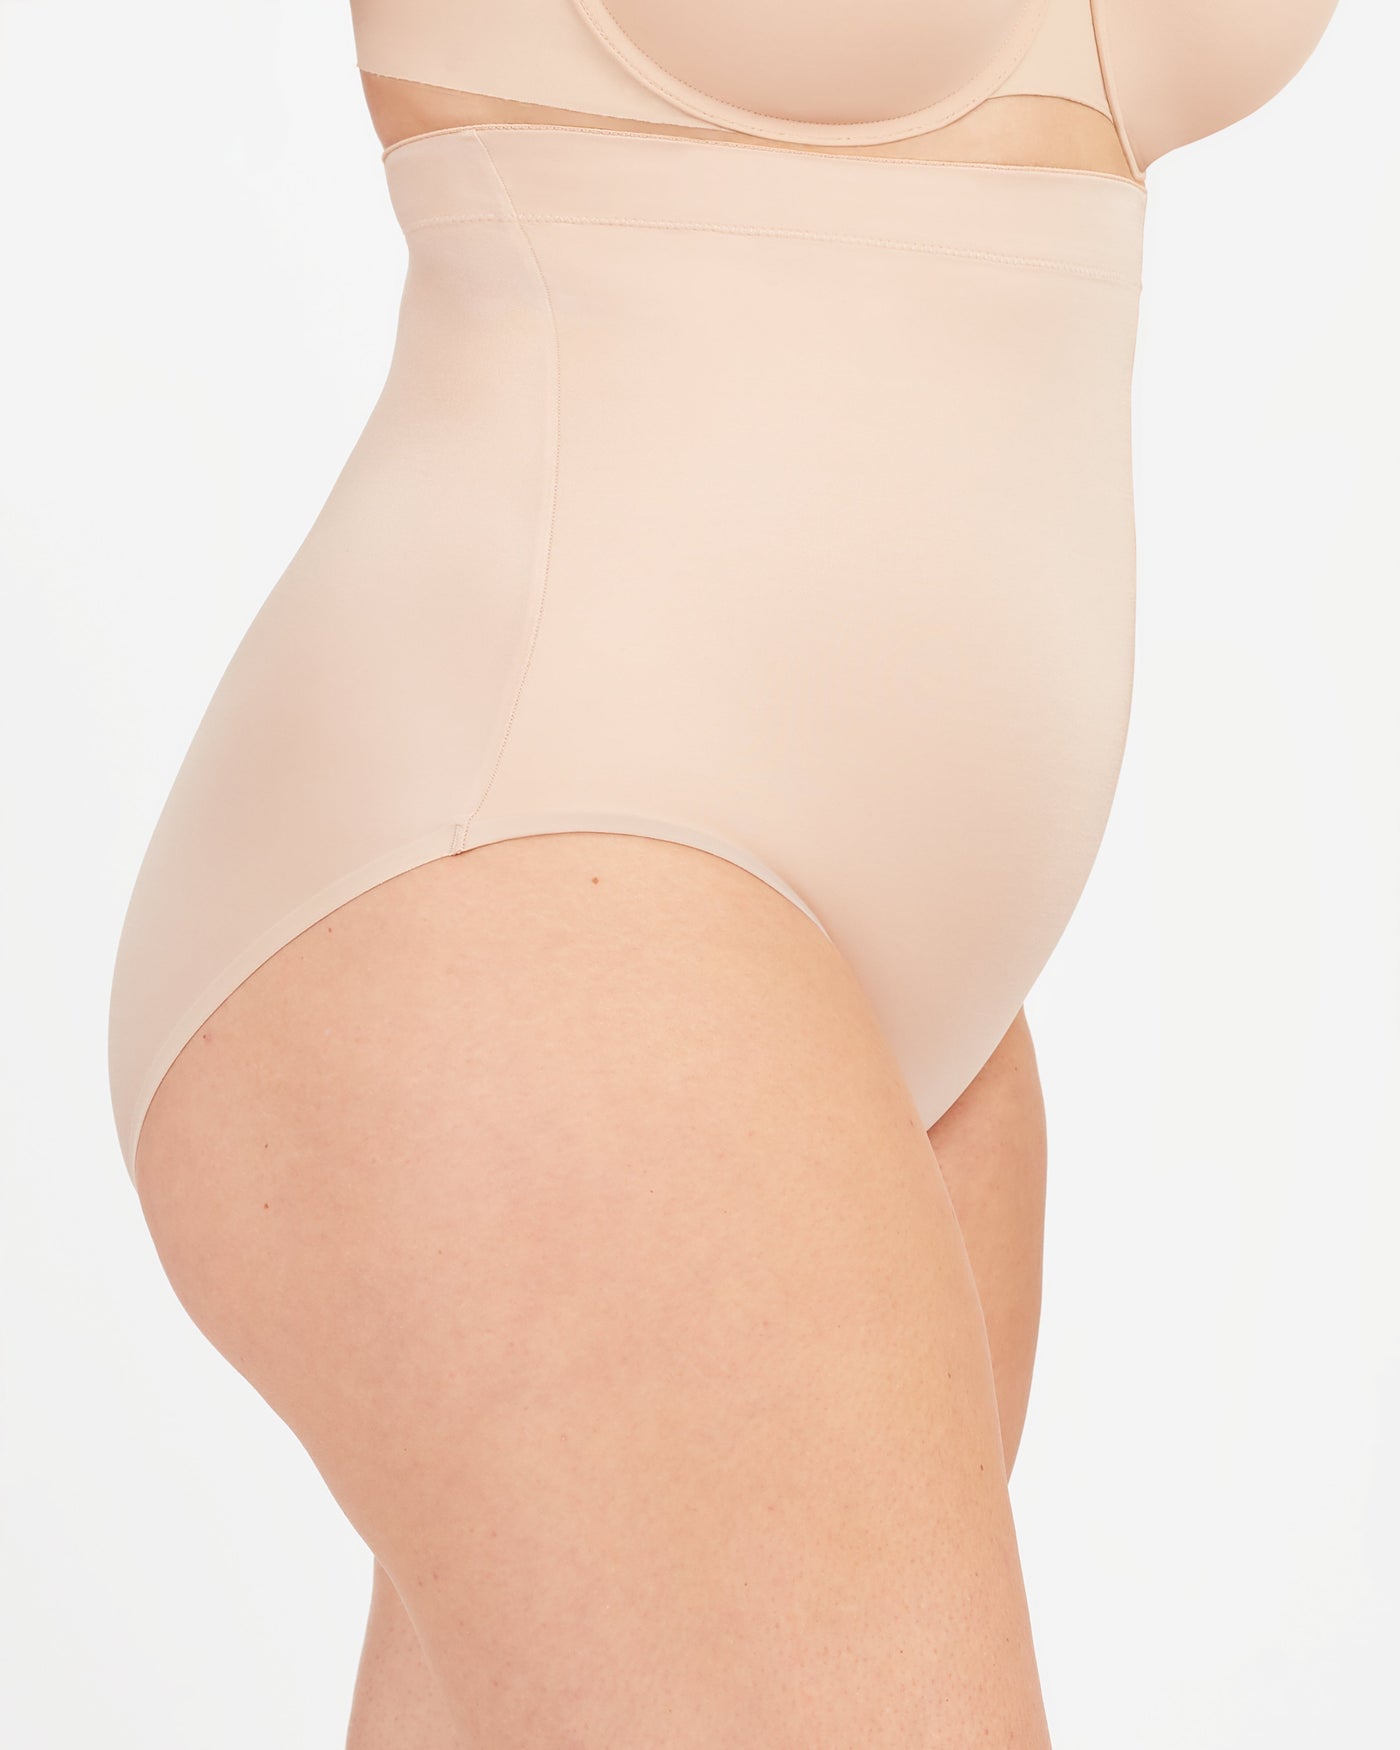 Suit Your Fancy High-Waisted Brief - Champagne Beige